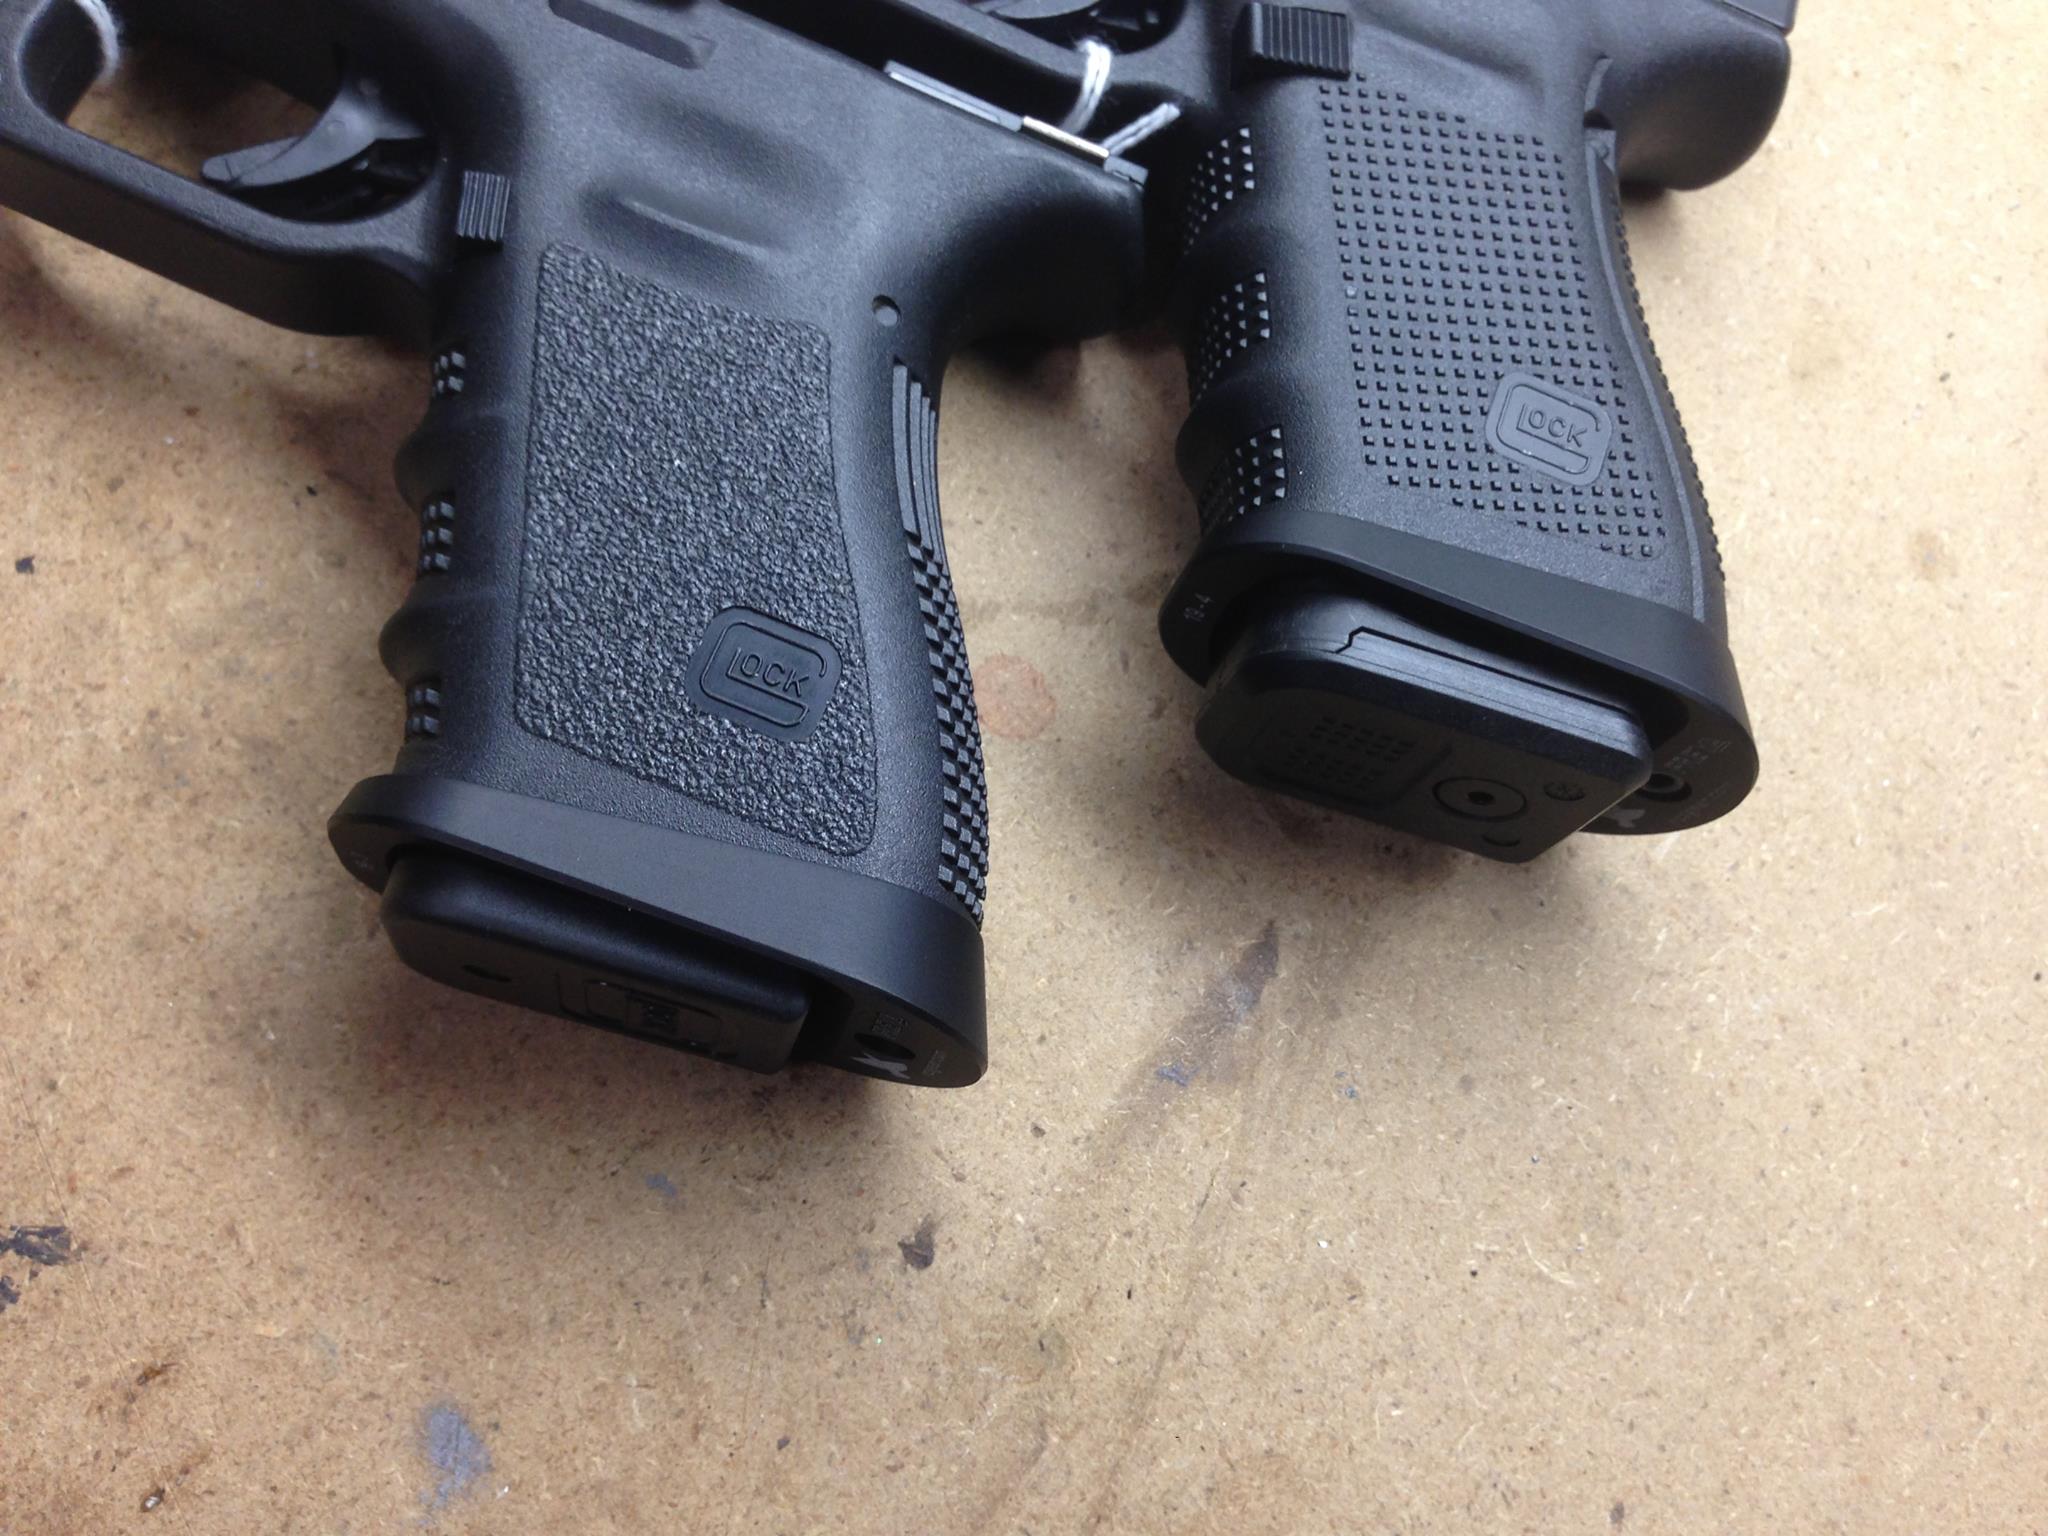 Sentinel Design Glock Magwells are Back Thanks to Raven Concealment.